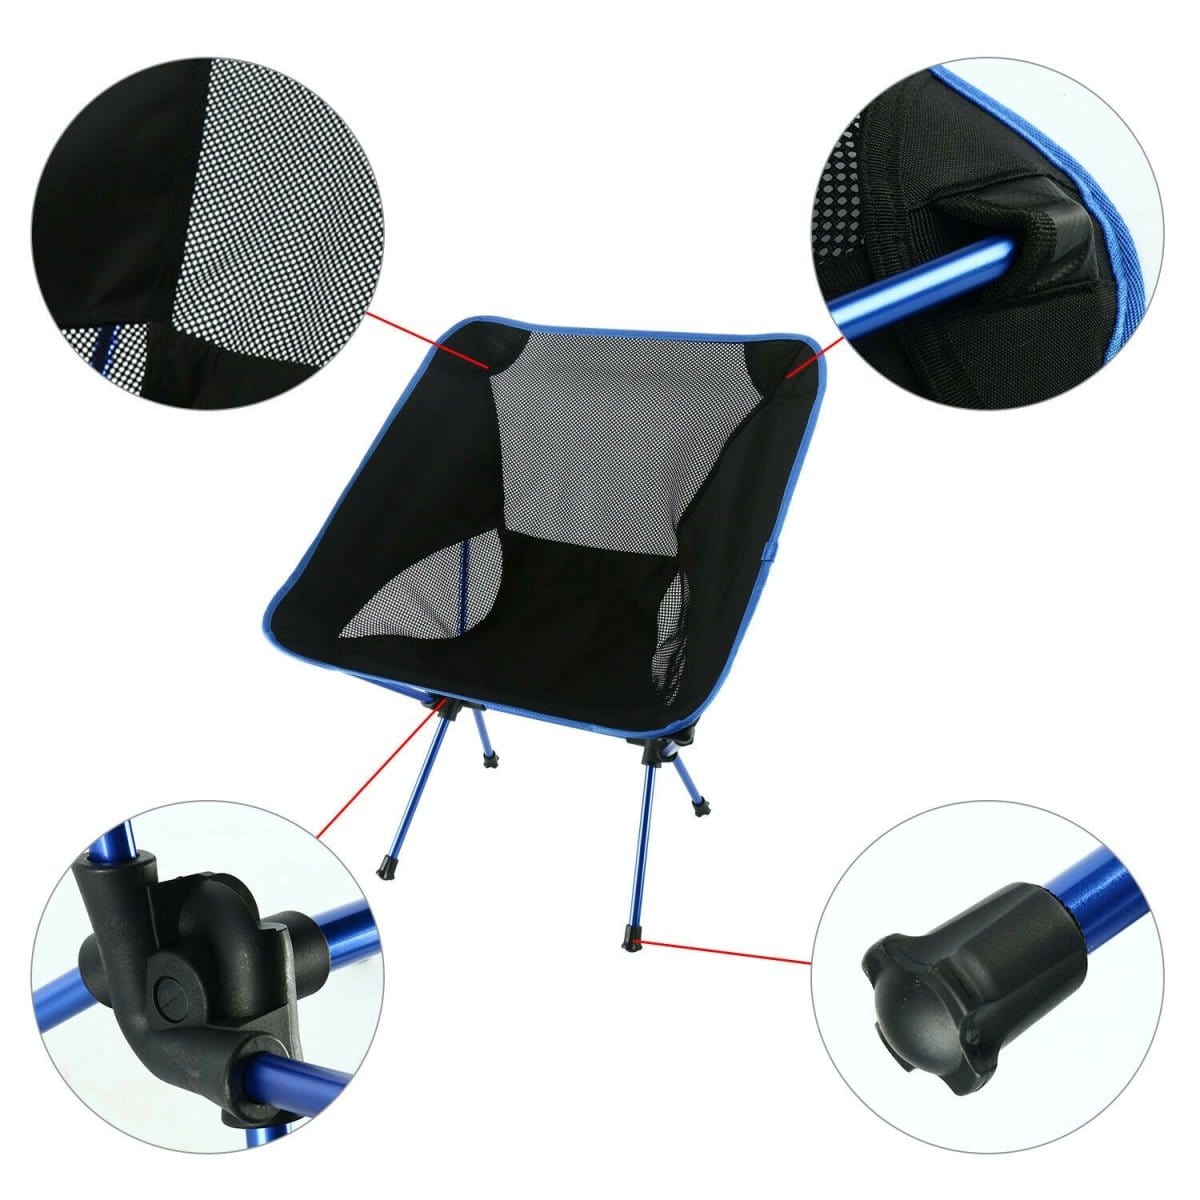 Ultralight Aluminum Alloy Folding Camping Camp Chair Outdoor Hiking Full Blue